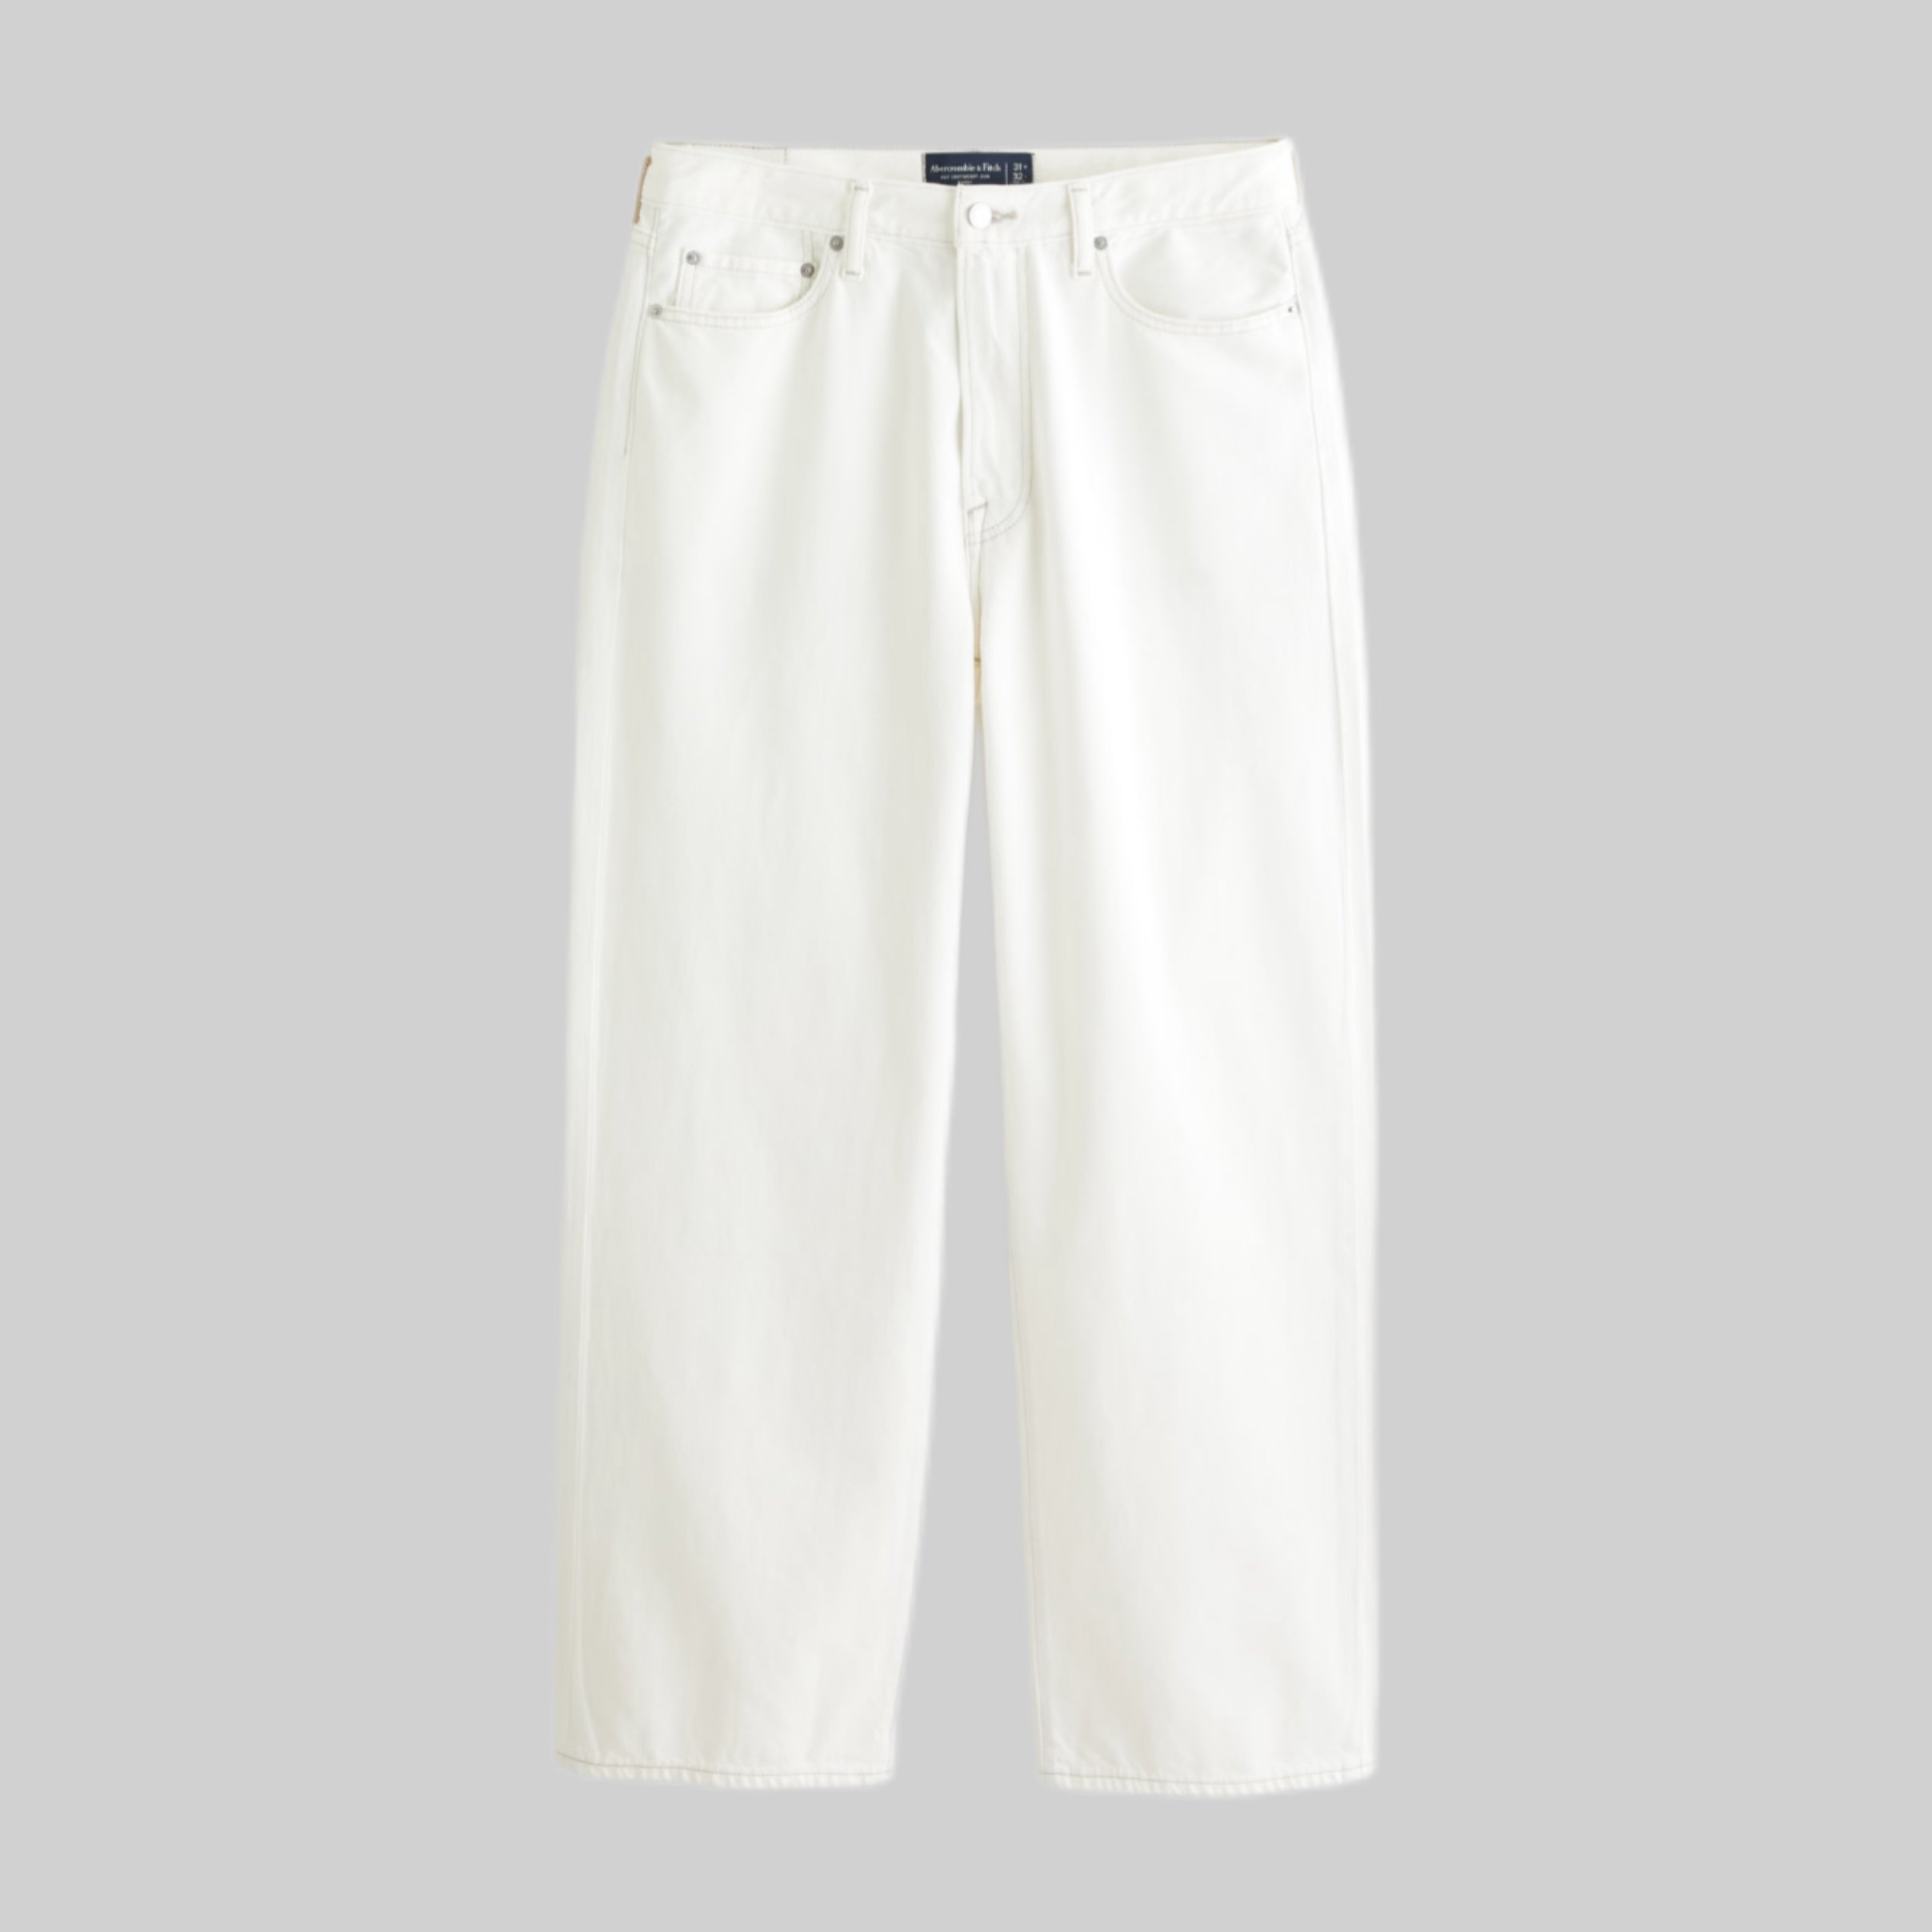 Abercrombie & Fitch jeans, men, frontisde, white